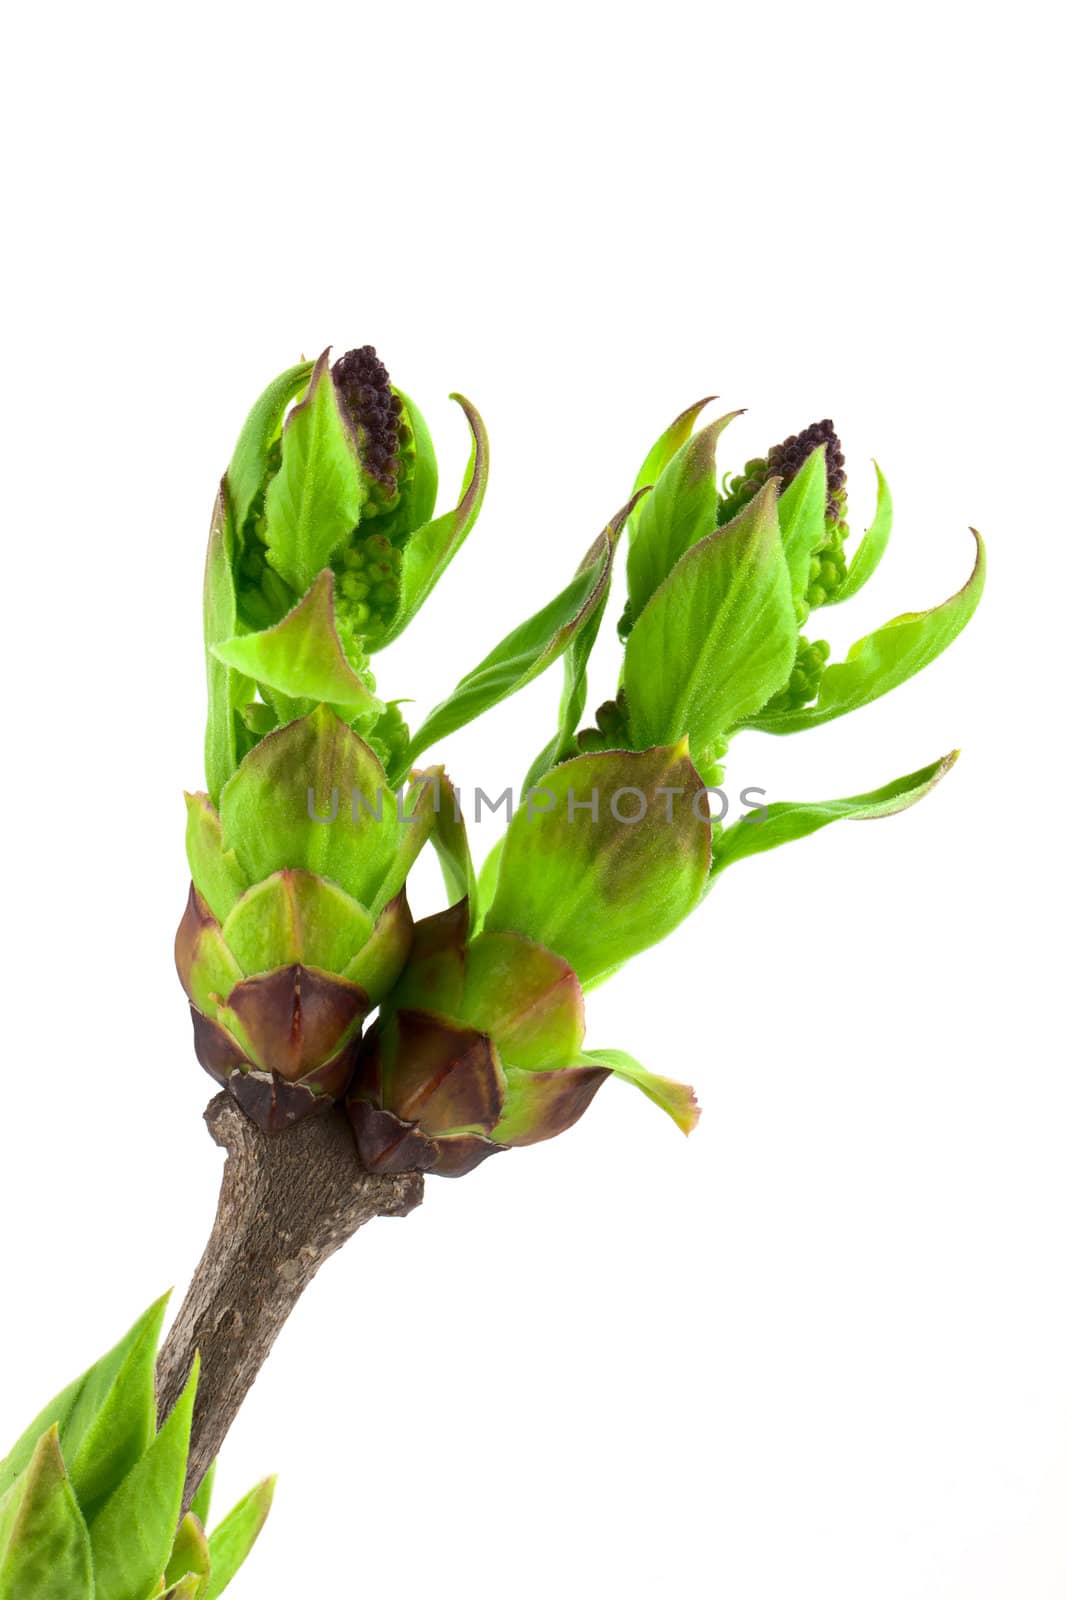 Lical buds isolated on white